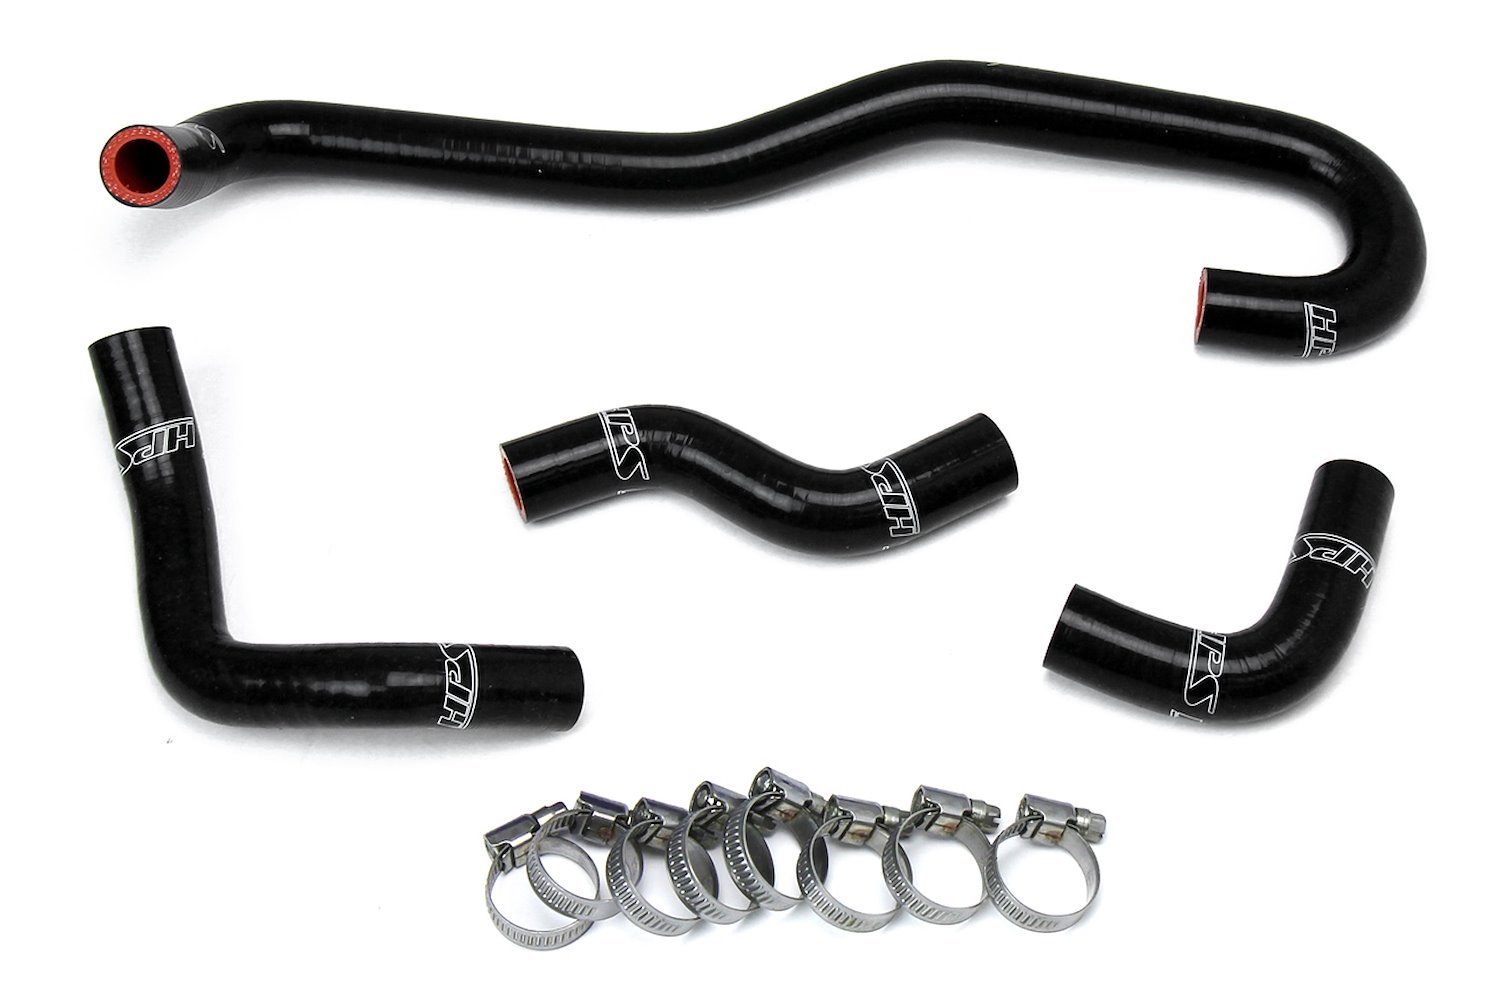 57-1655-BLK Heater Hose Kit, High-Temp 3-Ply Reinforced Silicone, Replace OEM Rubber Heater Coolant Hoses